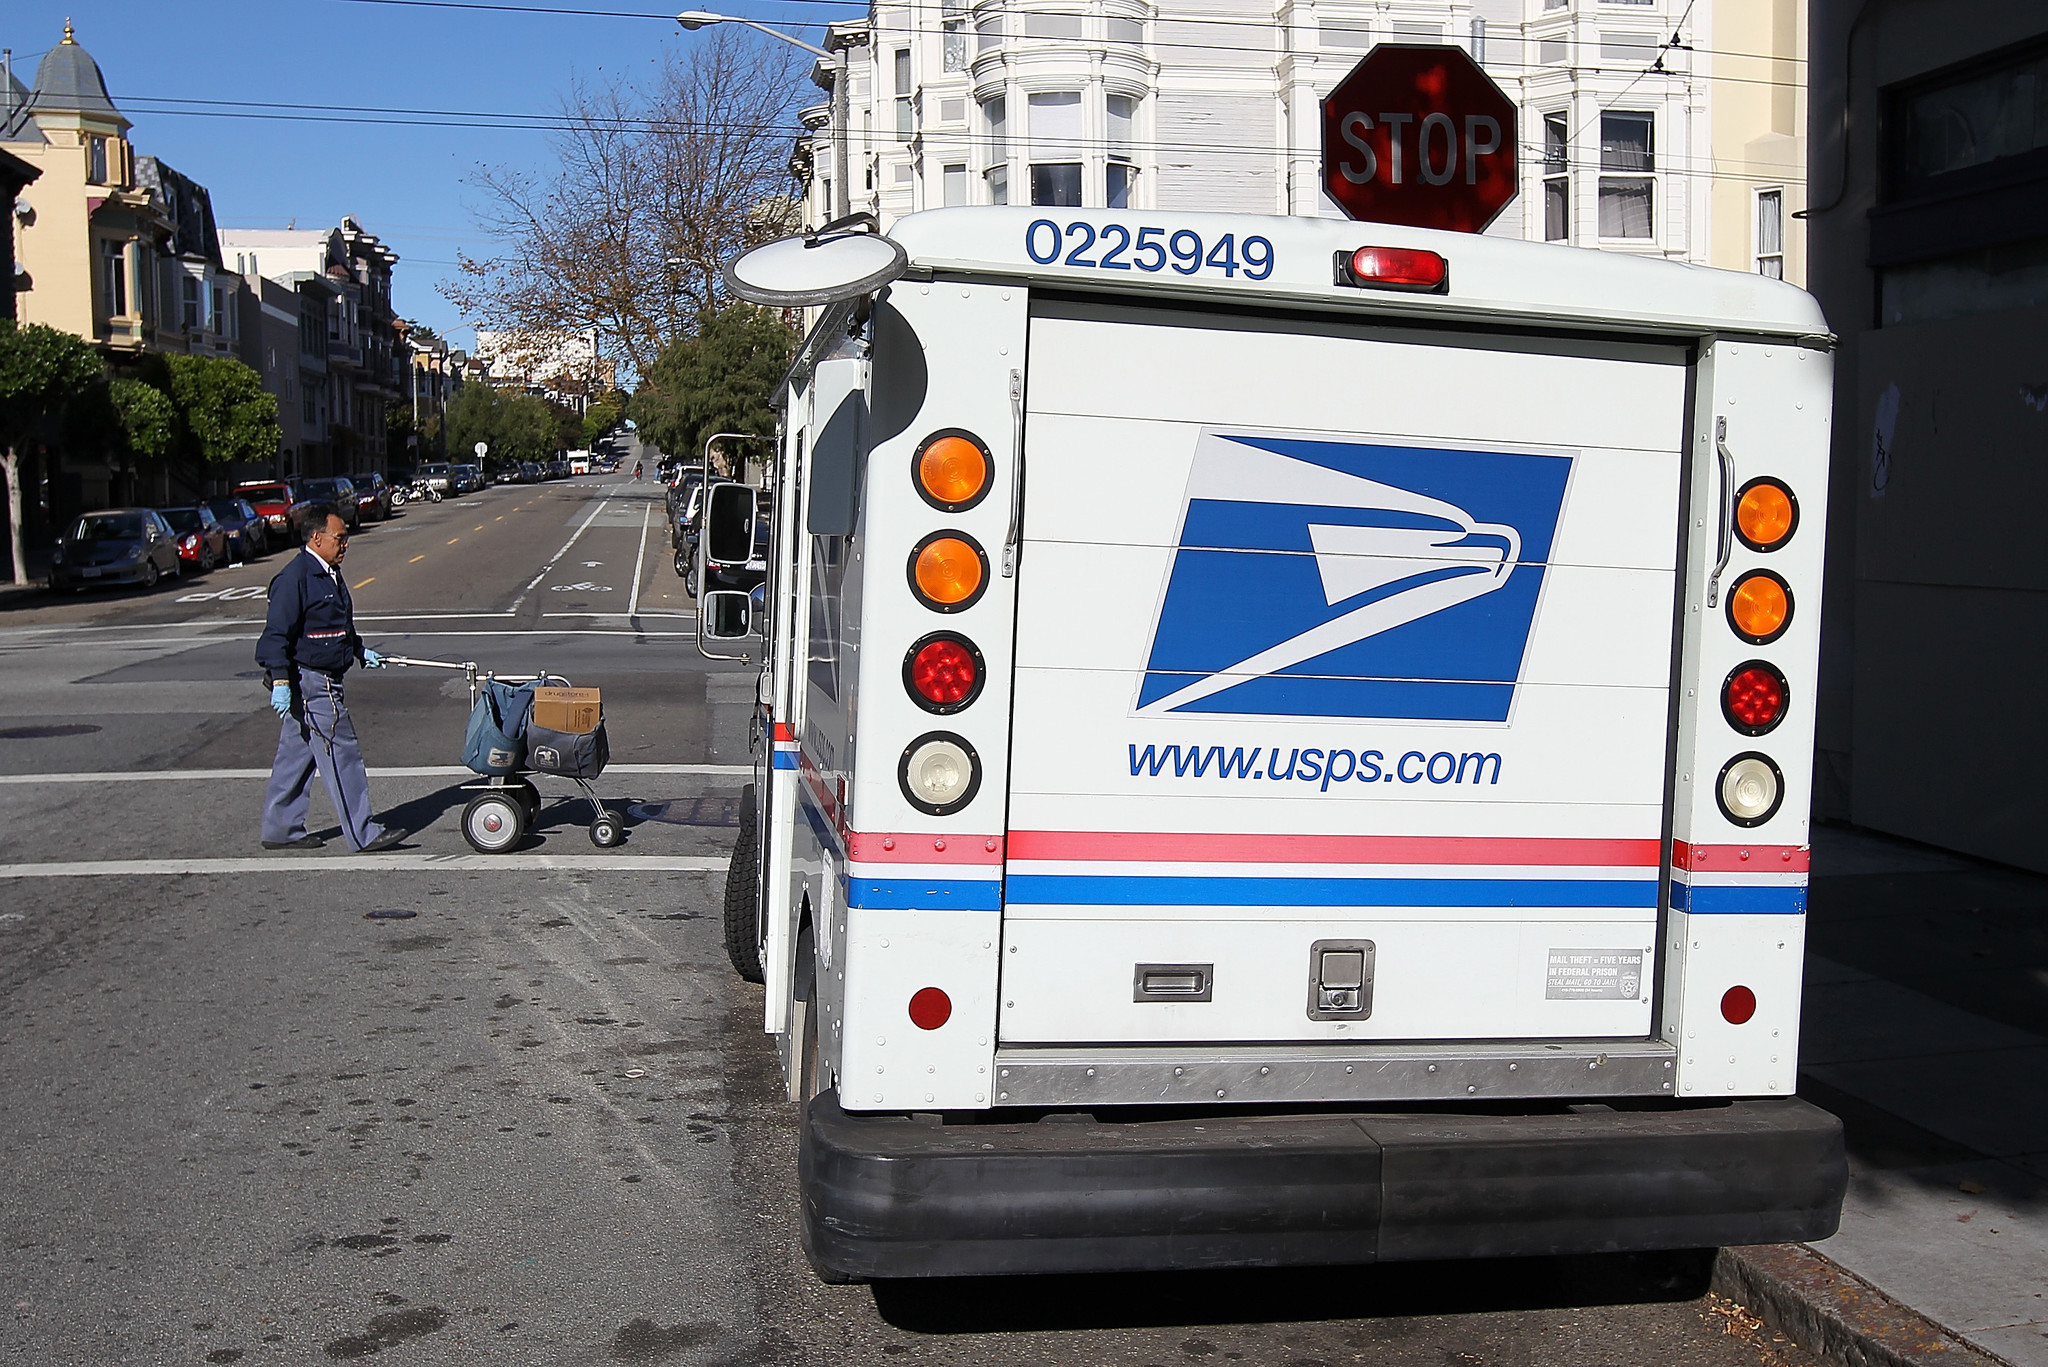 USPS looking for more than 100 employees in Southern Nevada